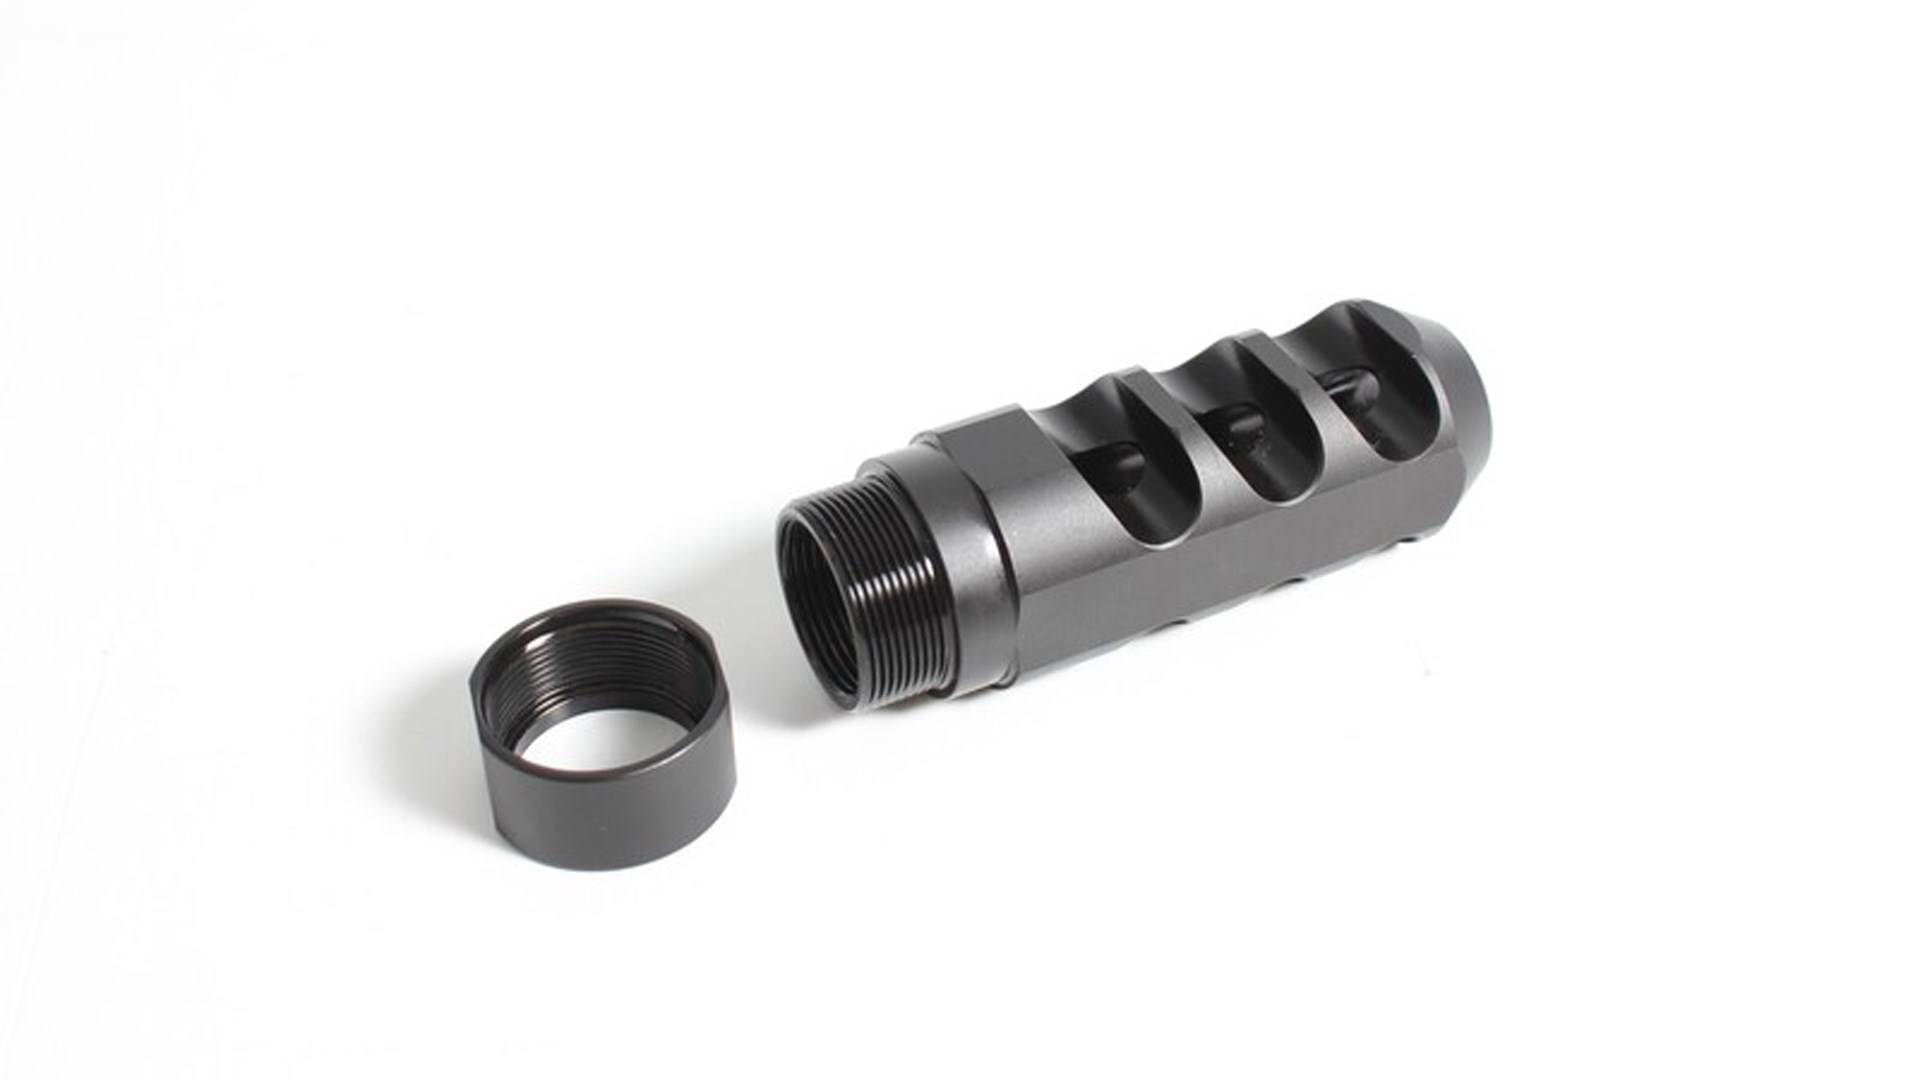 Traditions Pro Series muzzle brake shown on white.